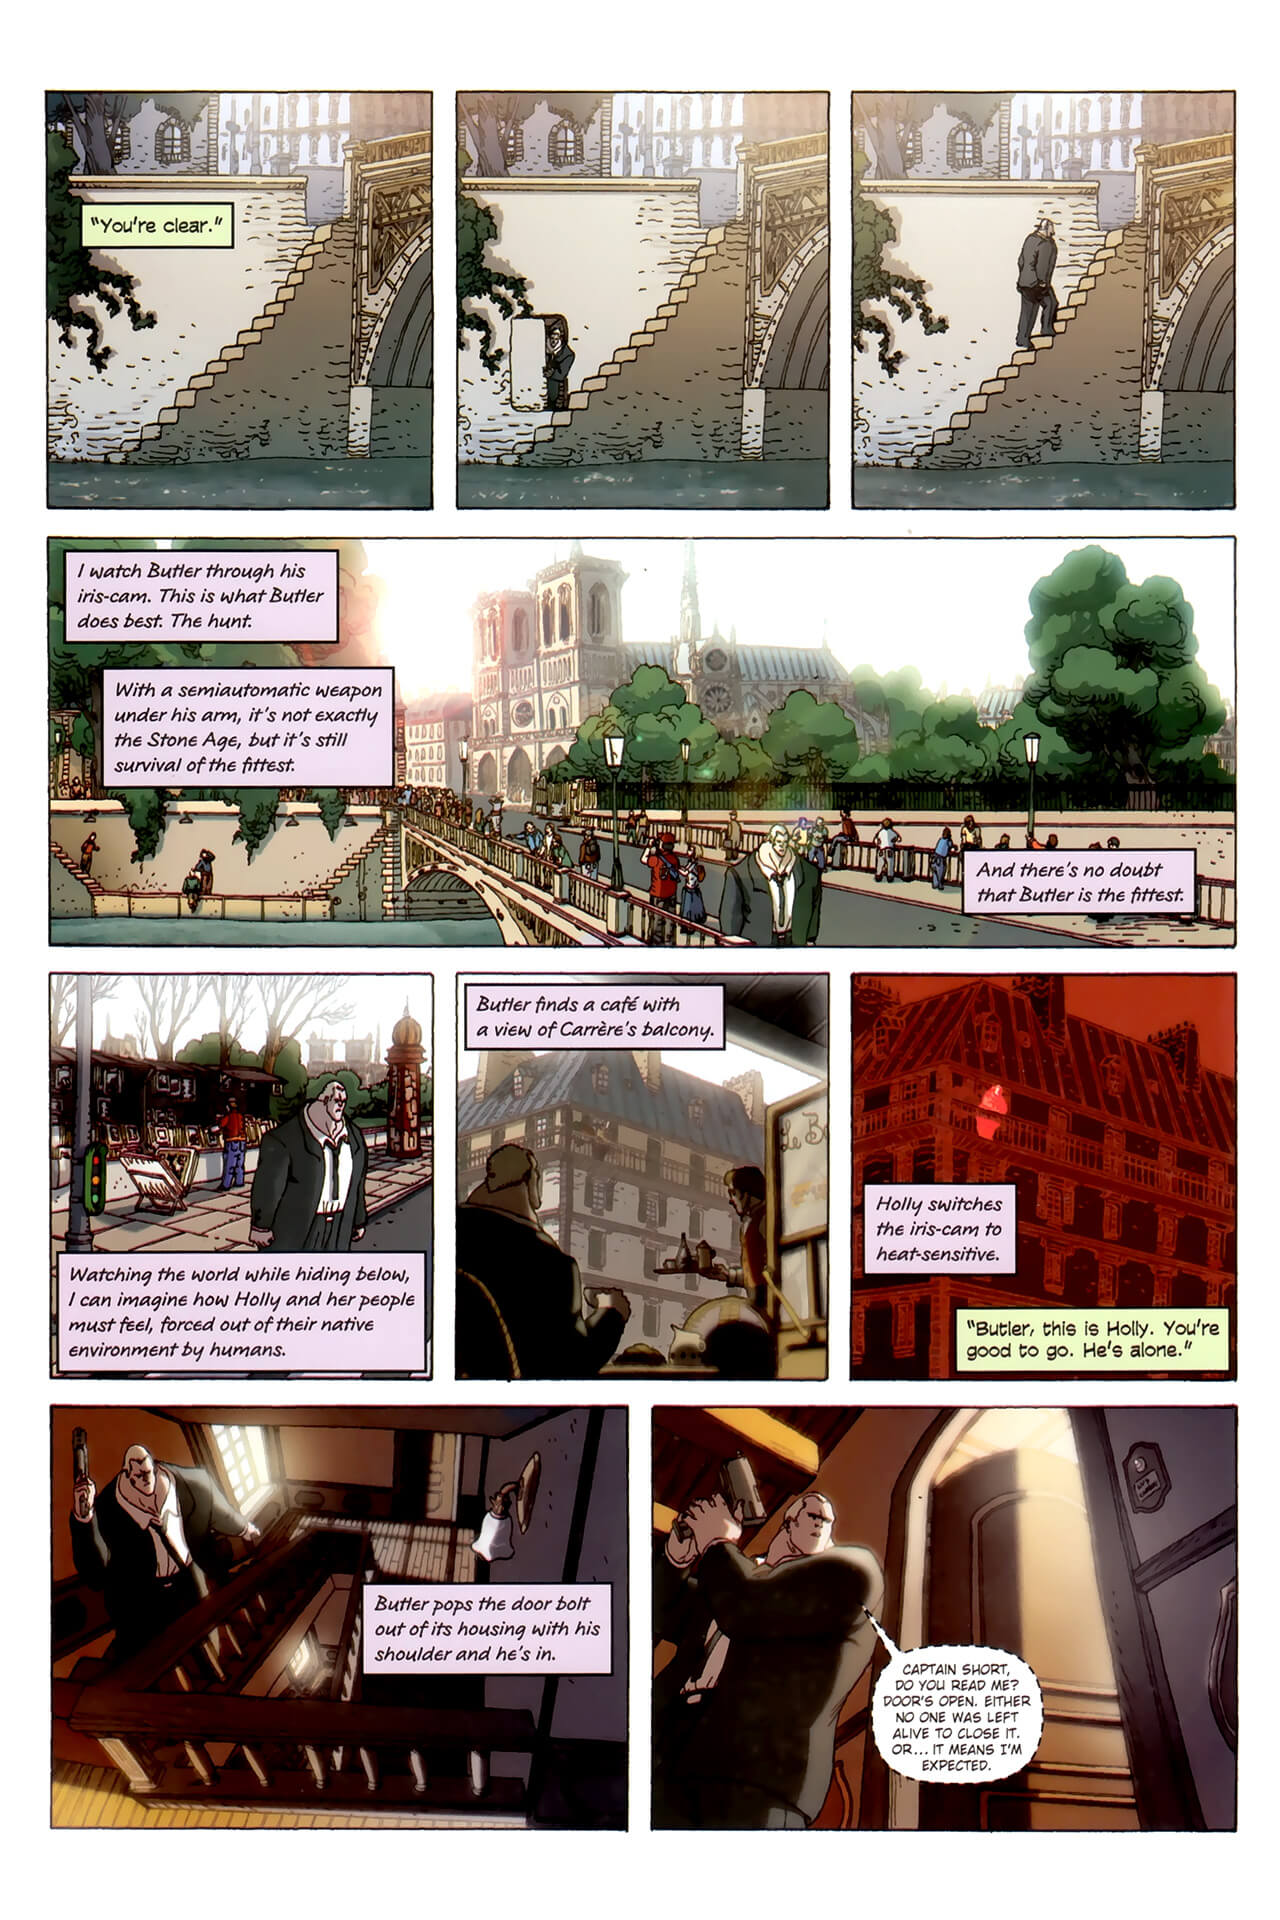 page 46 of artemis fowl the arctic incident graphic novel